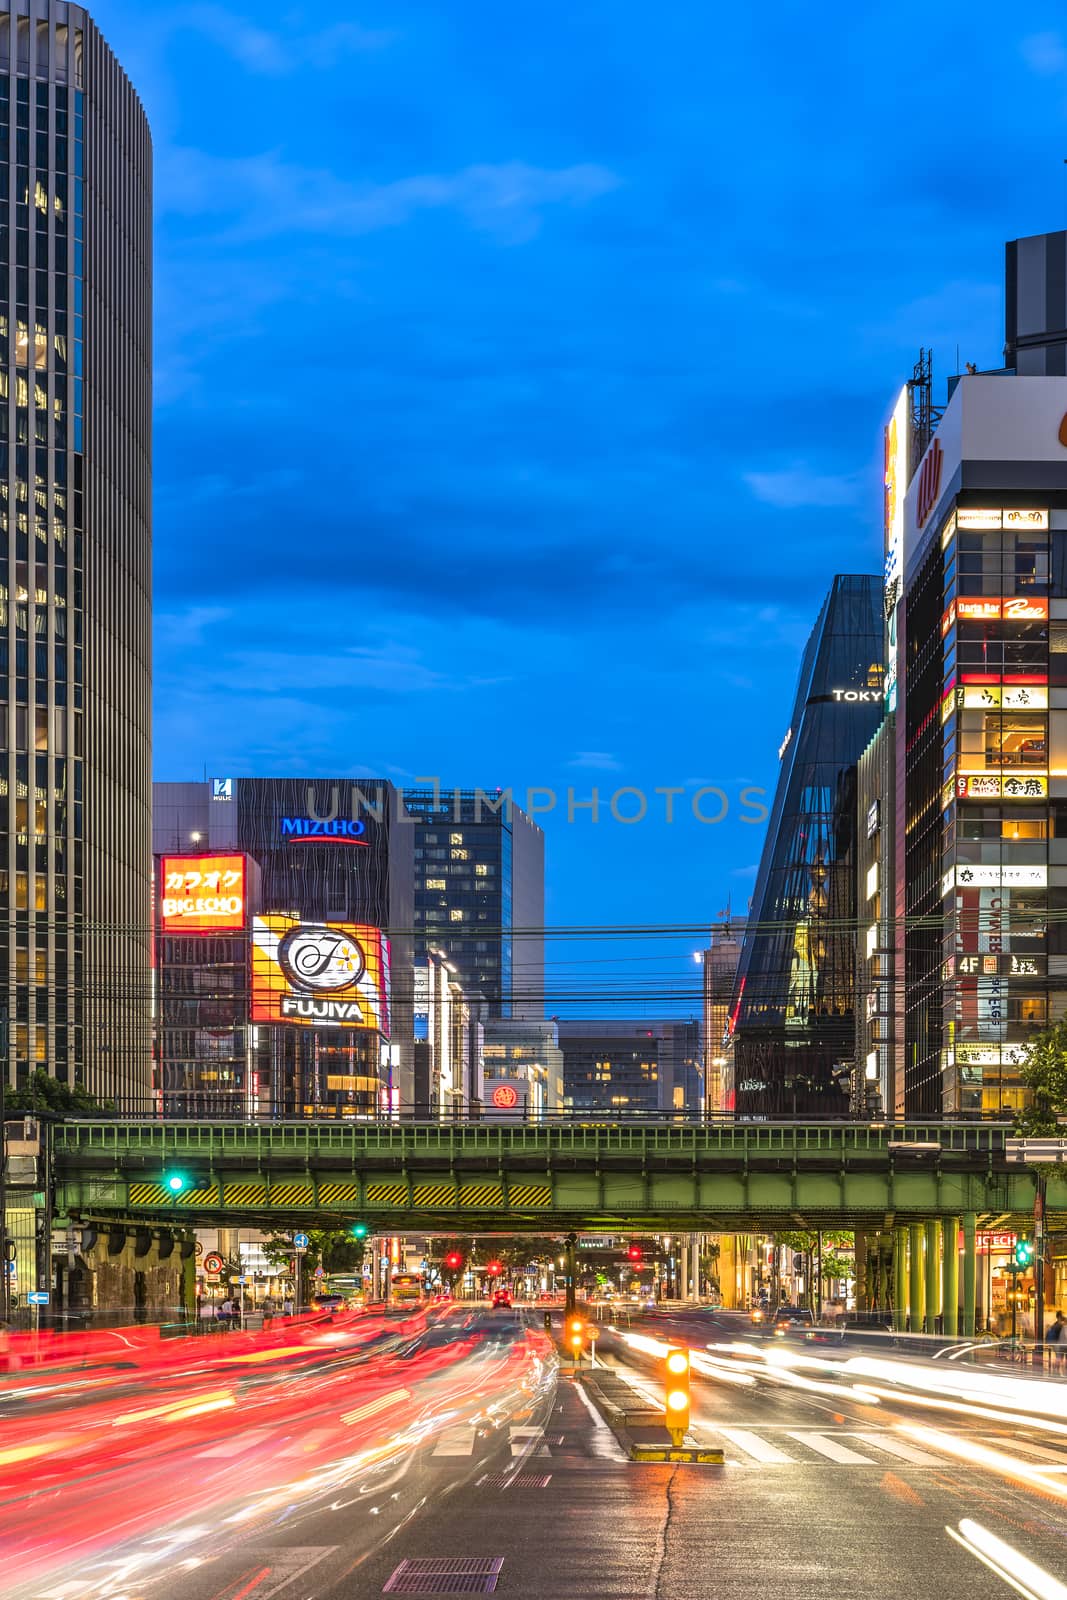 Night view of the Harumi street leading to Ginza district near to the entrance of the Hibiya Park (日比谷公園 Hibiya Kōen) in Chiyoda City of Tokyo in Japan. Harumi street is leading from the Iwaida Bridge intersection in Chiyoda Ward to the Shinonome intersection in Koto ward.